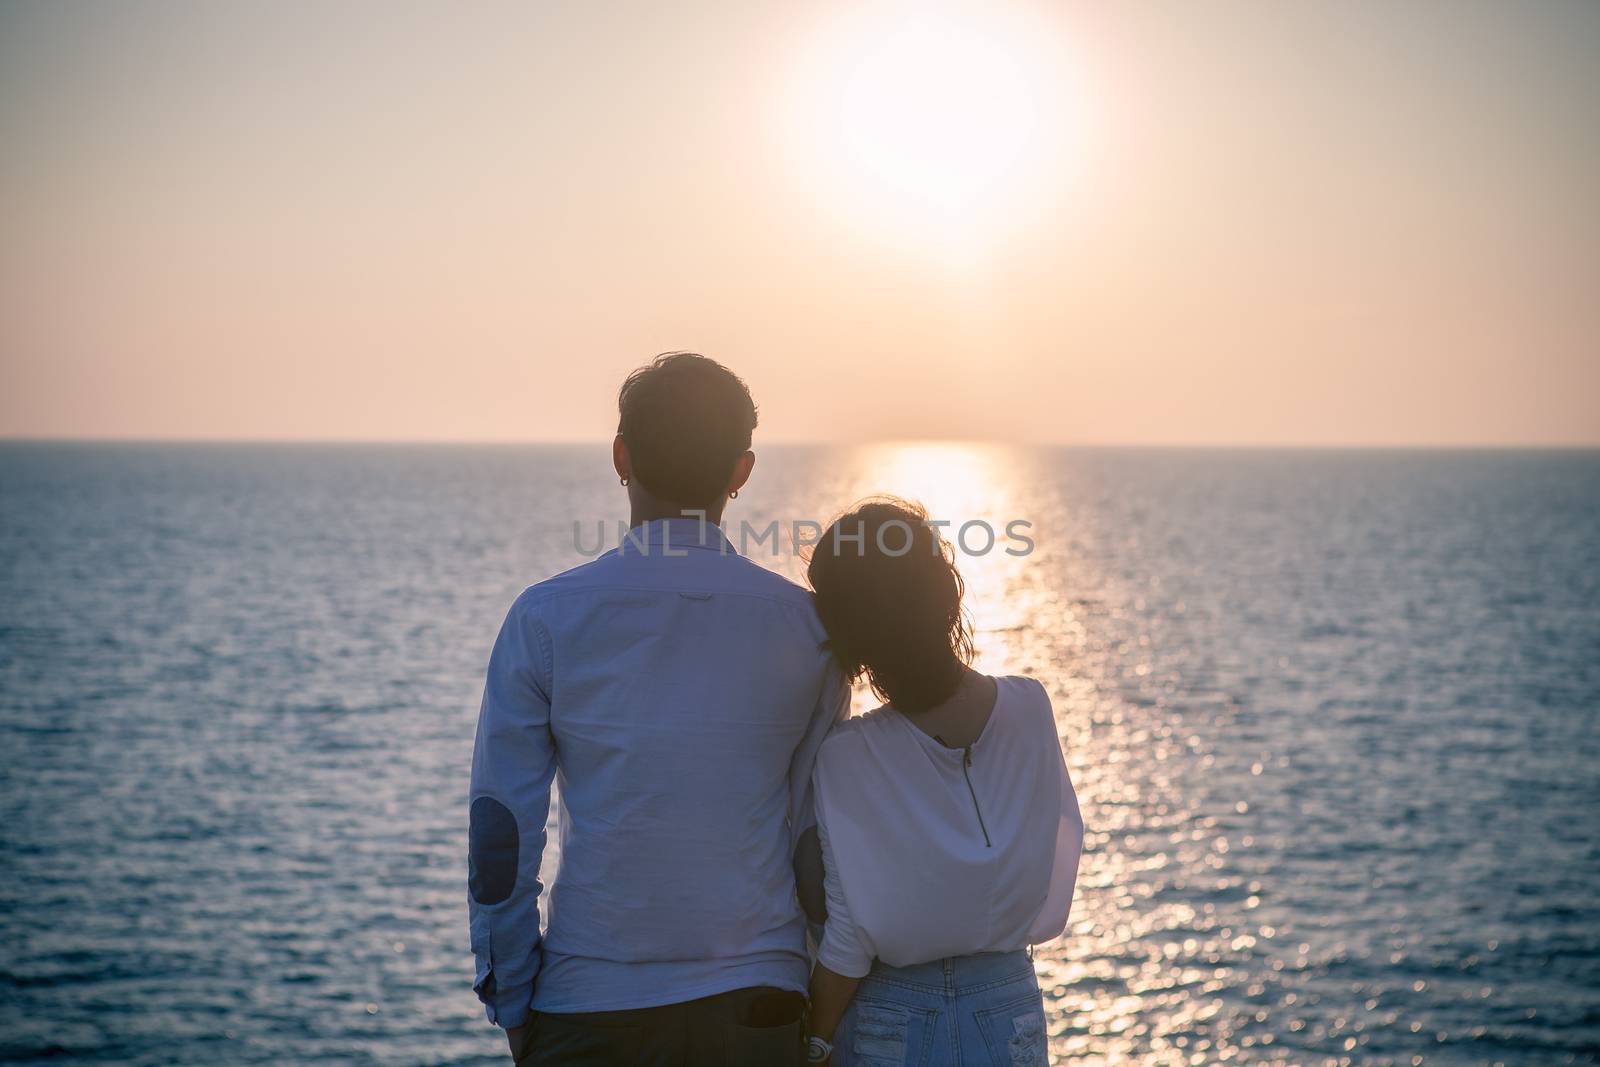 hipster photography style of younger love couples vacation relaxing with sun set sky at destination sea side happiness emotion